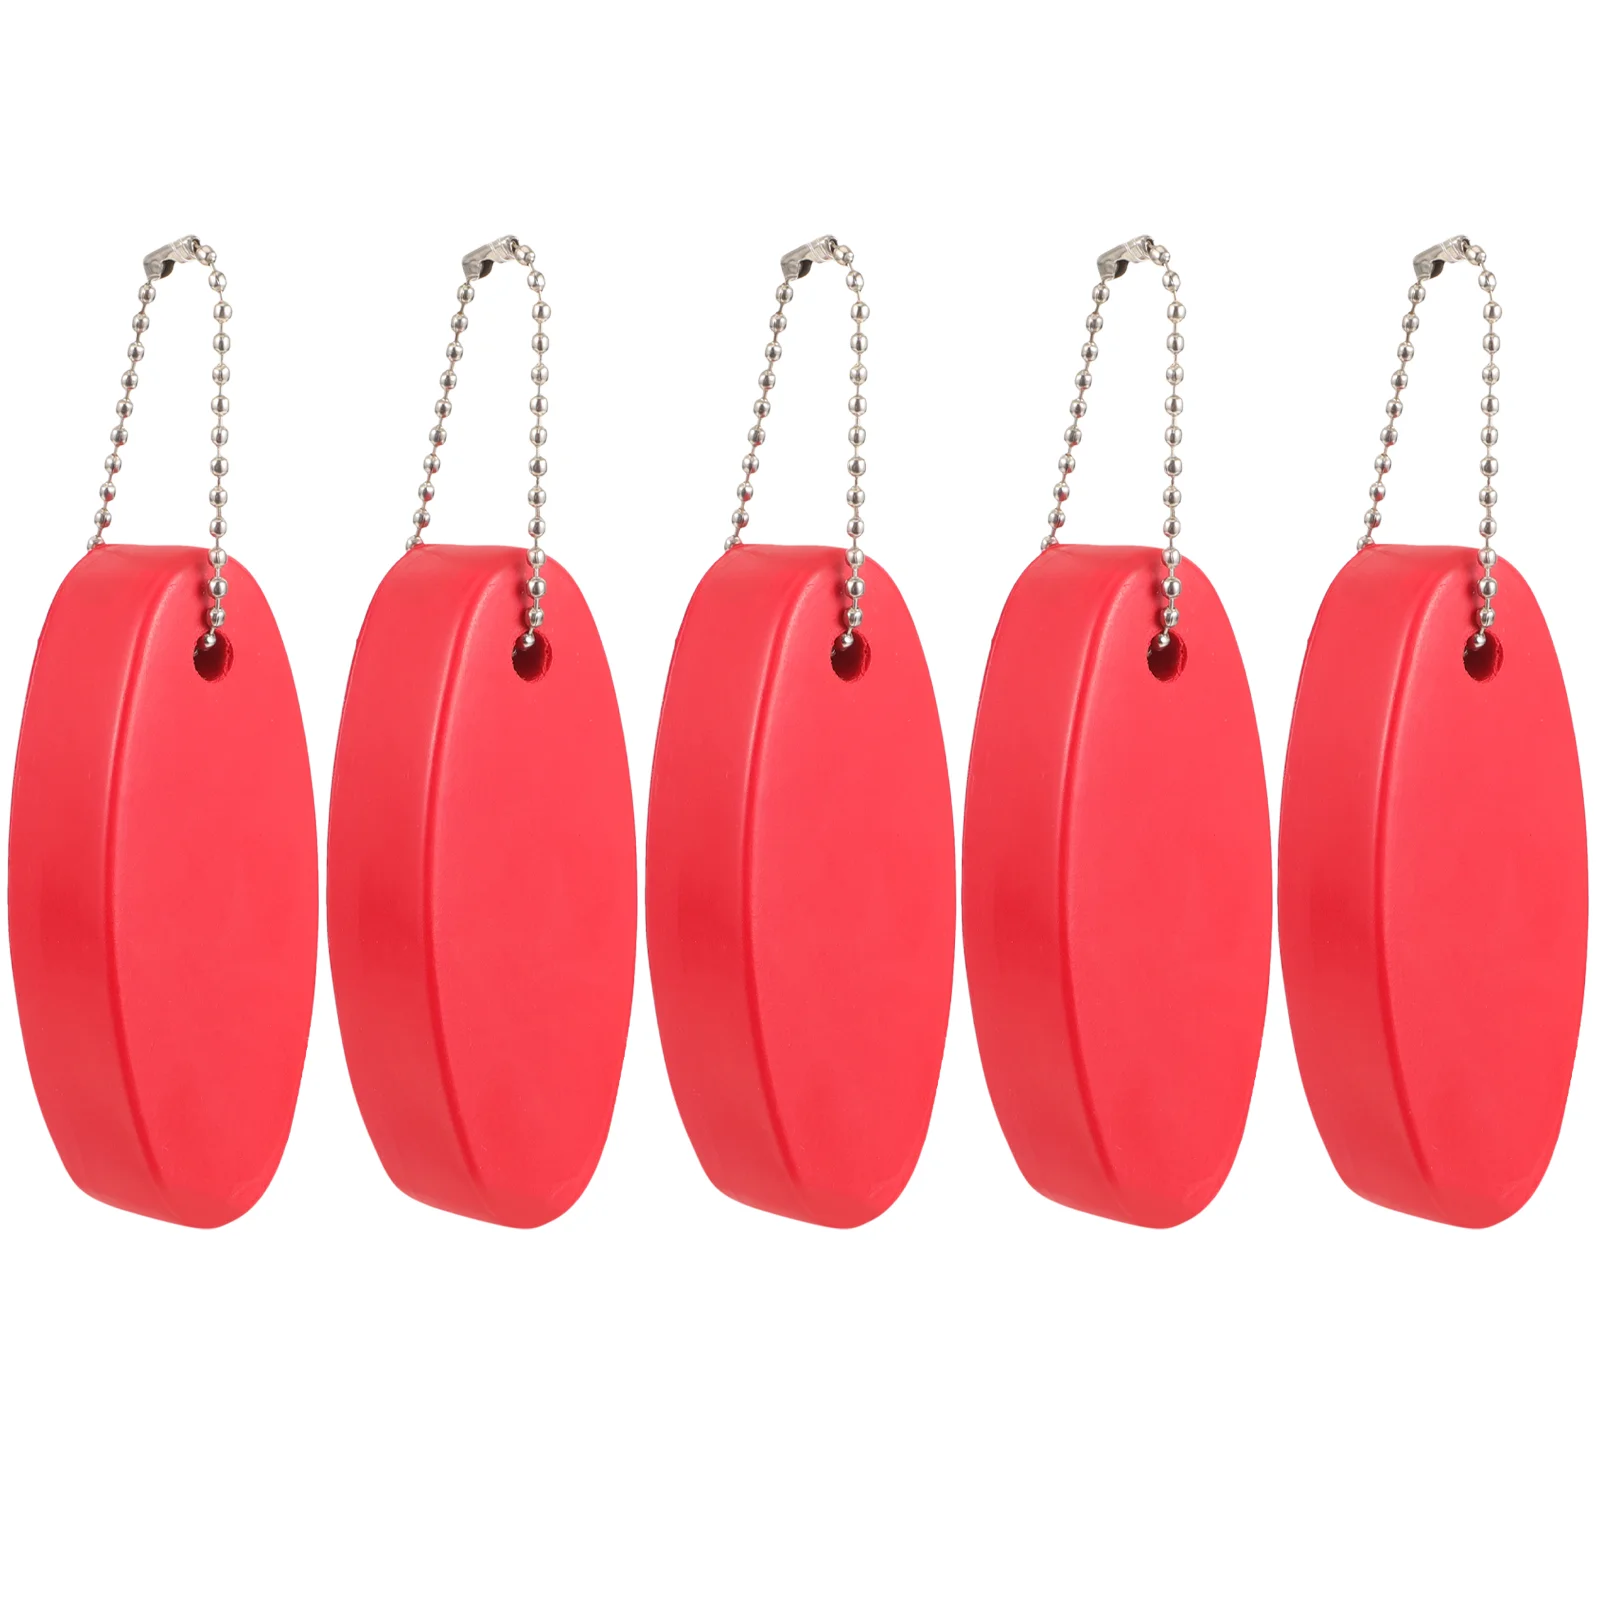 5Pcs Floating Keychains Colored Floating Key Rings Water Sports Keychains Surfboard Pendant Keychains 5pcs pu key chains floating keychains kayaking keychains surfboard floating keychains keys pendants